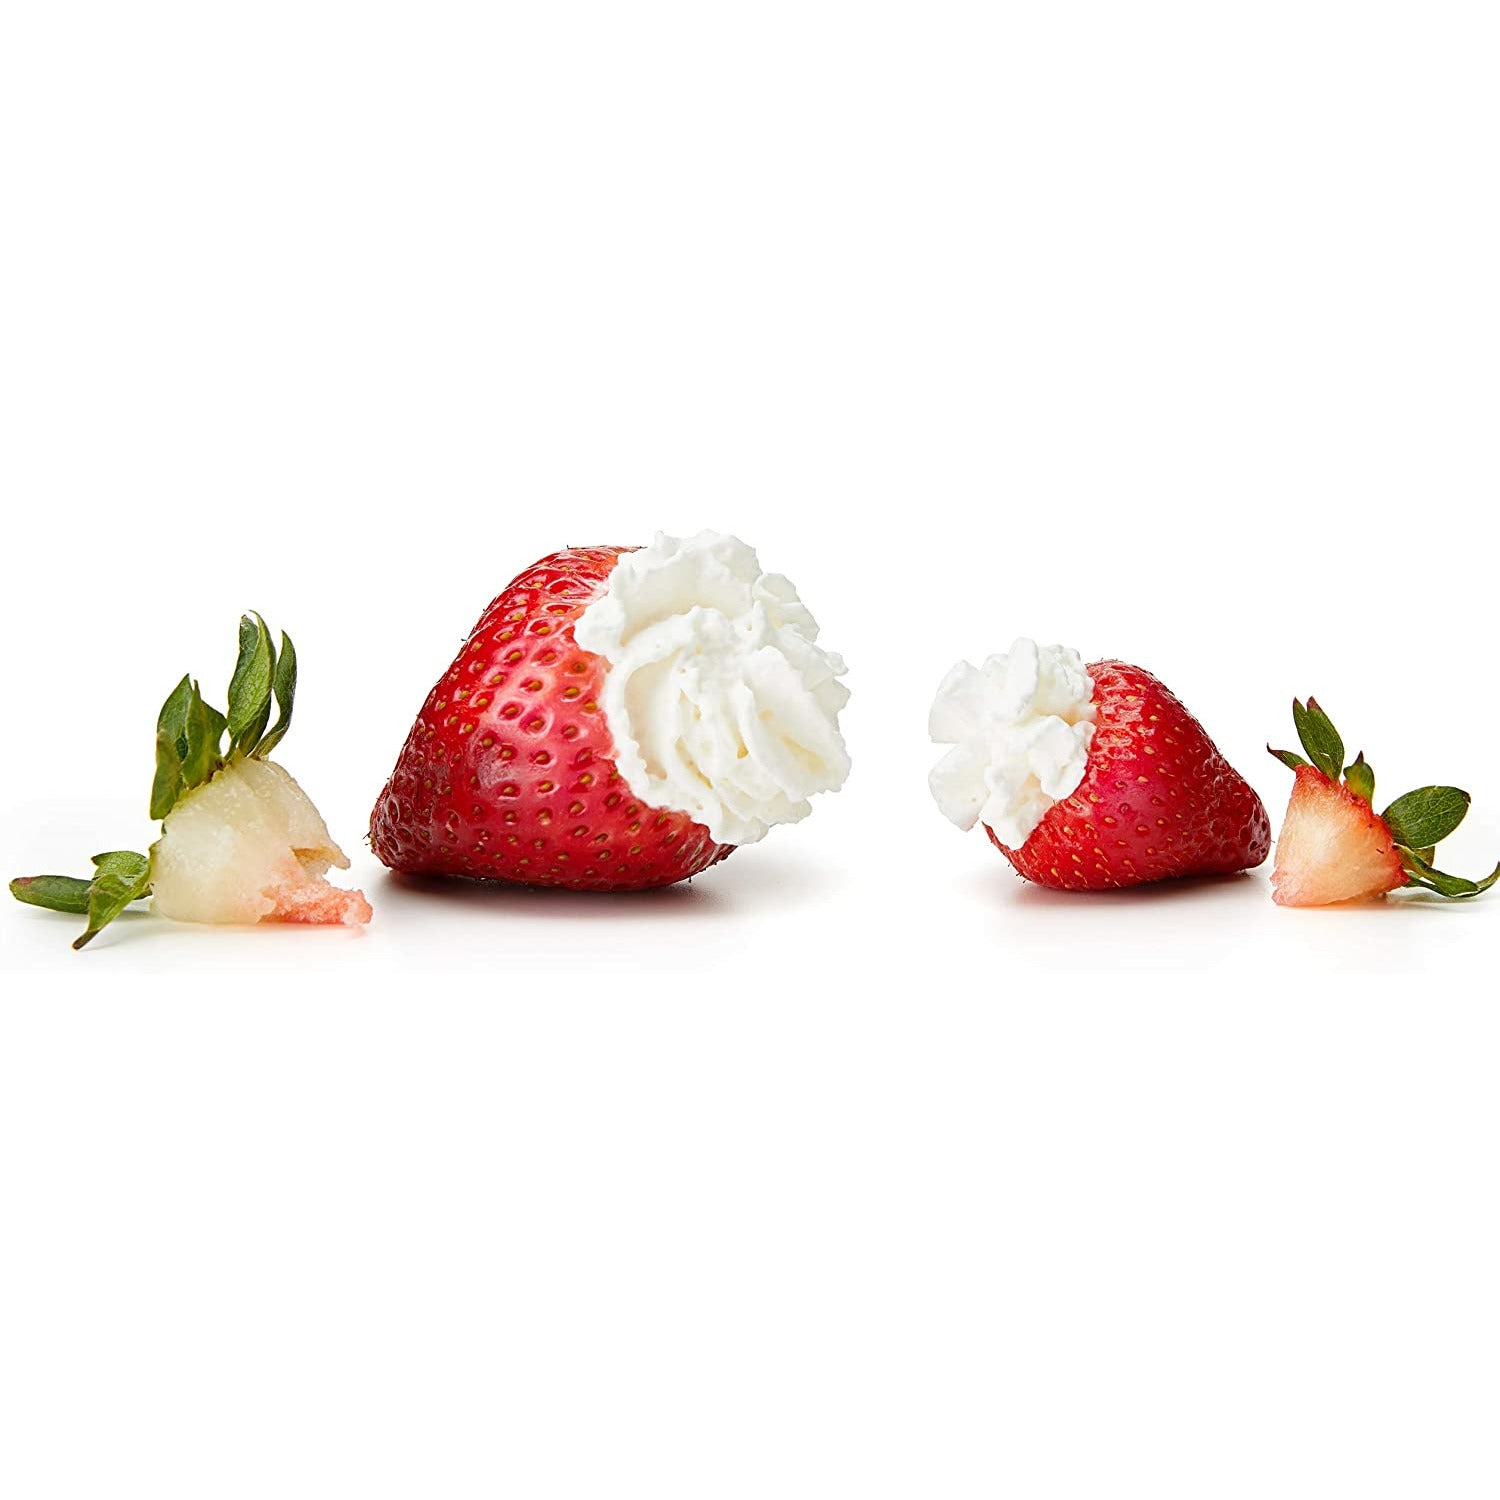 De-stem strawberries with the metal strawberry huller